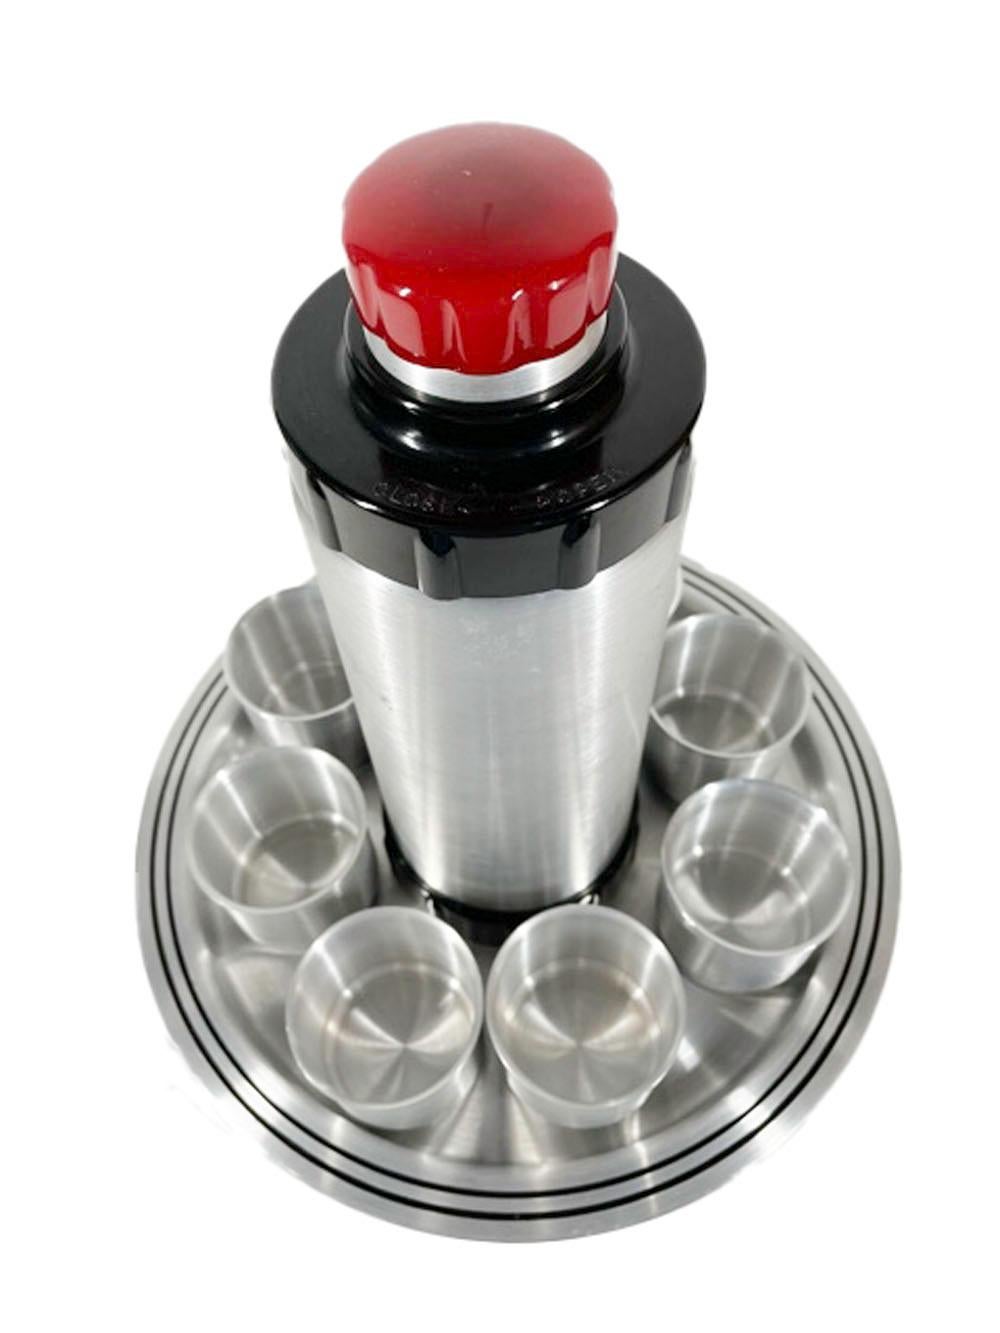 Art Deco period brushed aluminum and Bakelite cocktail shaker set. The shaker with a black Bakelite foot and screw top with a red Bakelite and aluminum cap which doubles as a jigger, while the accompanying tray and cups are decorated with an inset